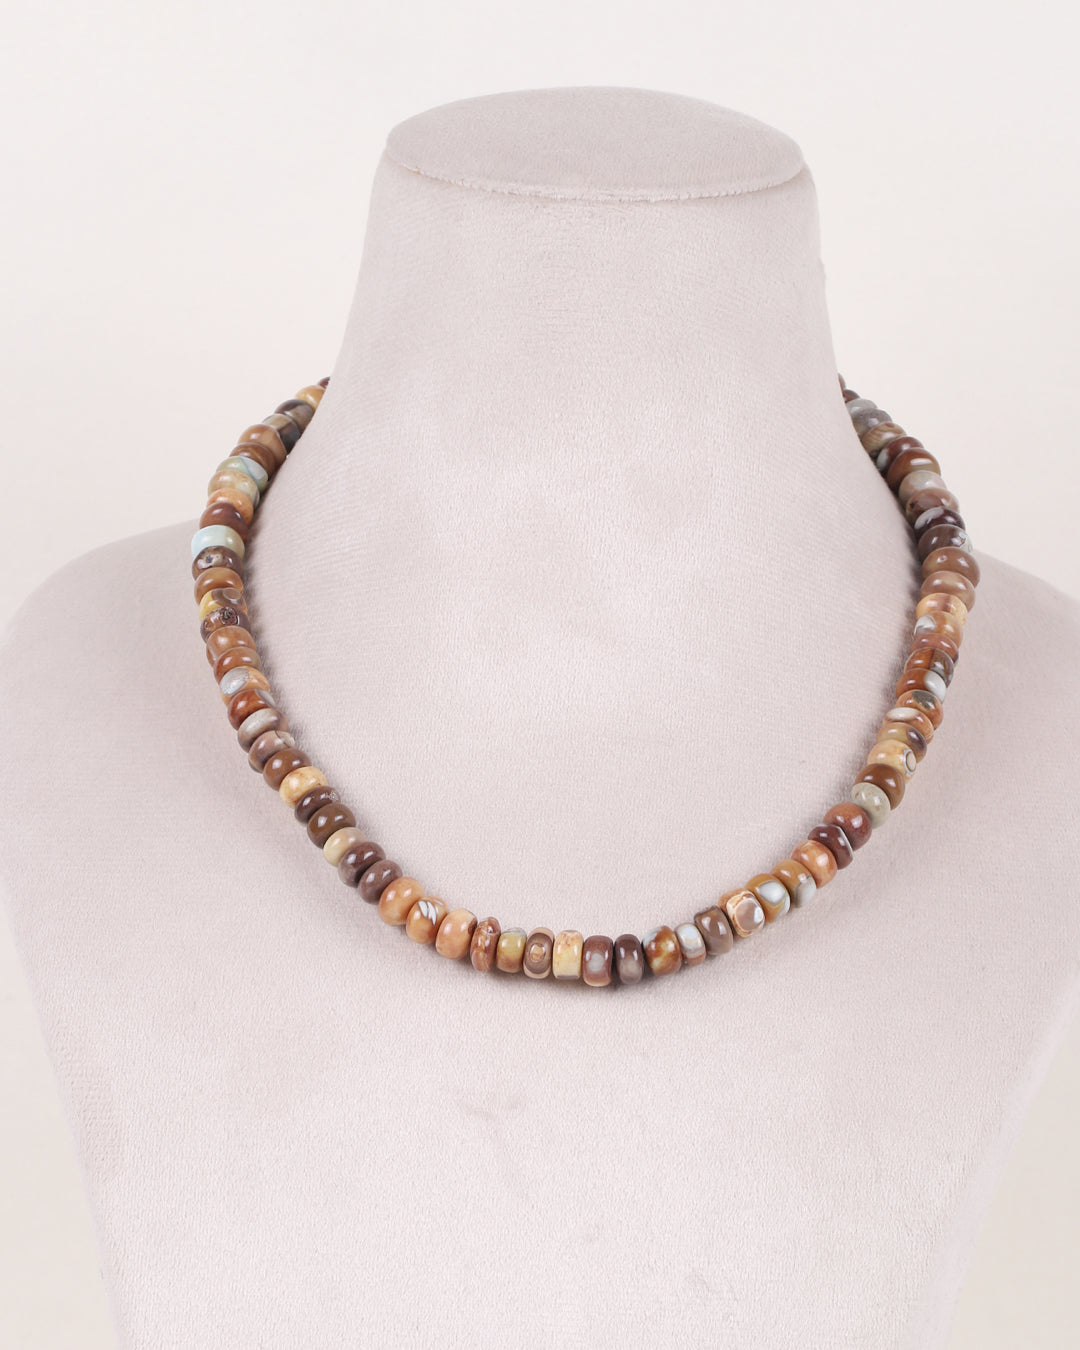 Brown Opal Gemstone Rondelle Smooth Beads Necklace Jewelry